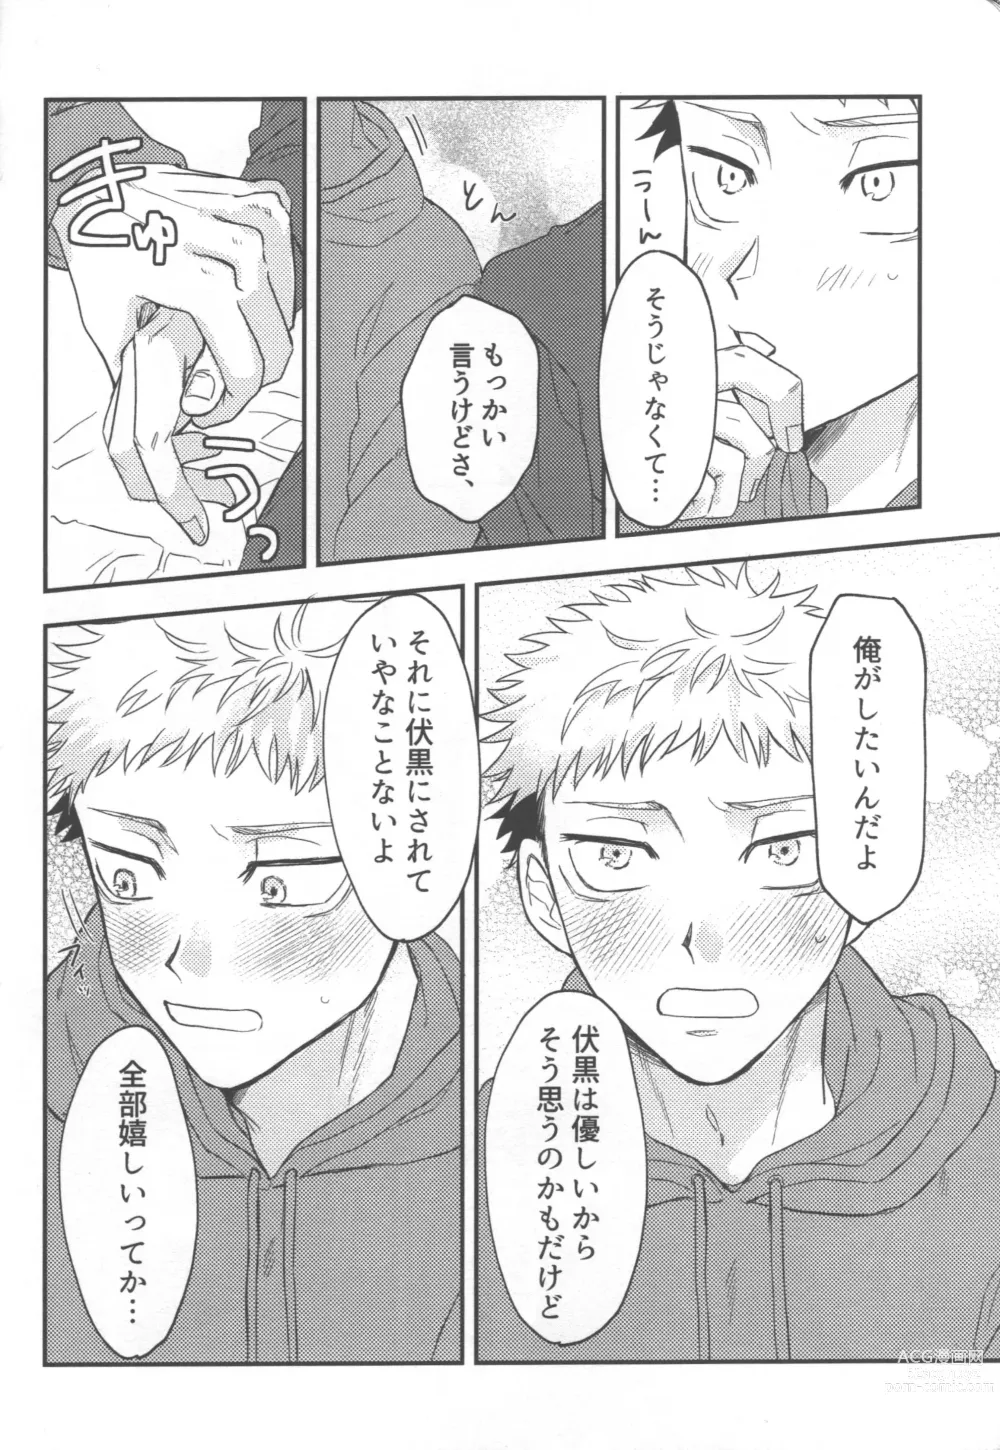 Page 13 of doujinshi Dont Look at ME Like That.